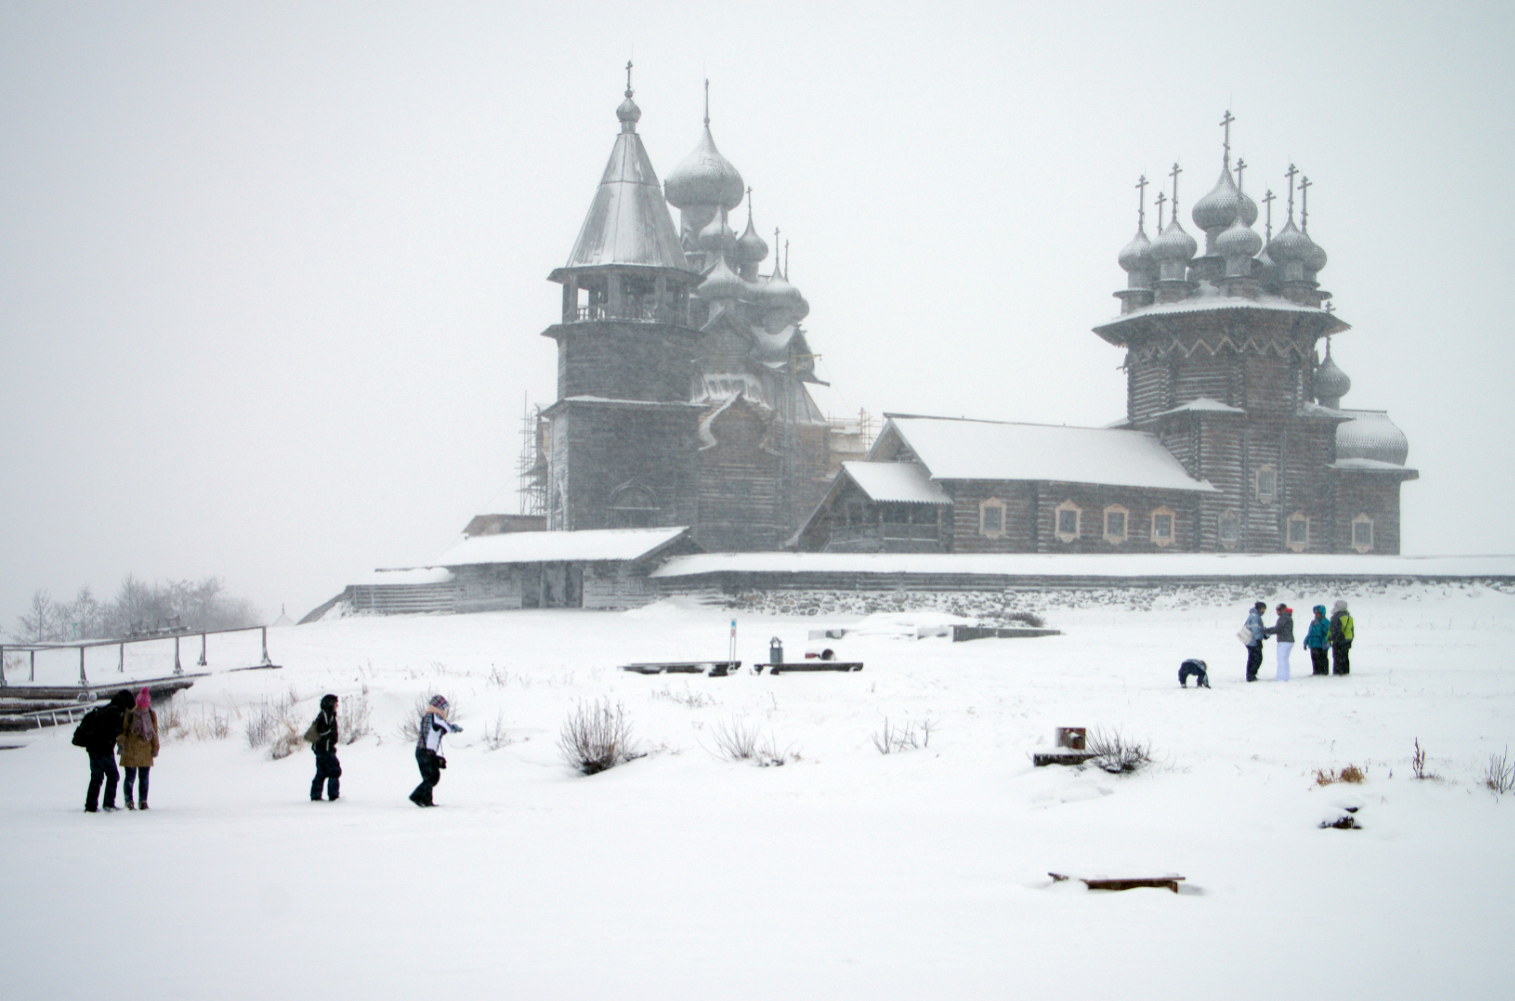 The Kizhi Pogost in Karelia has two wooden churches and an 18th century octagonal bell tower. 